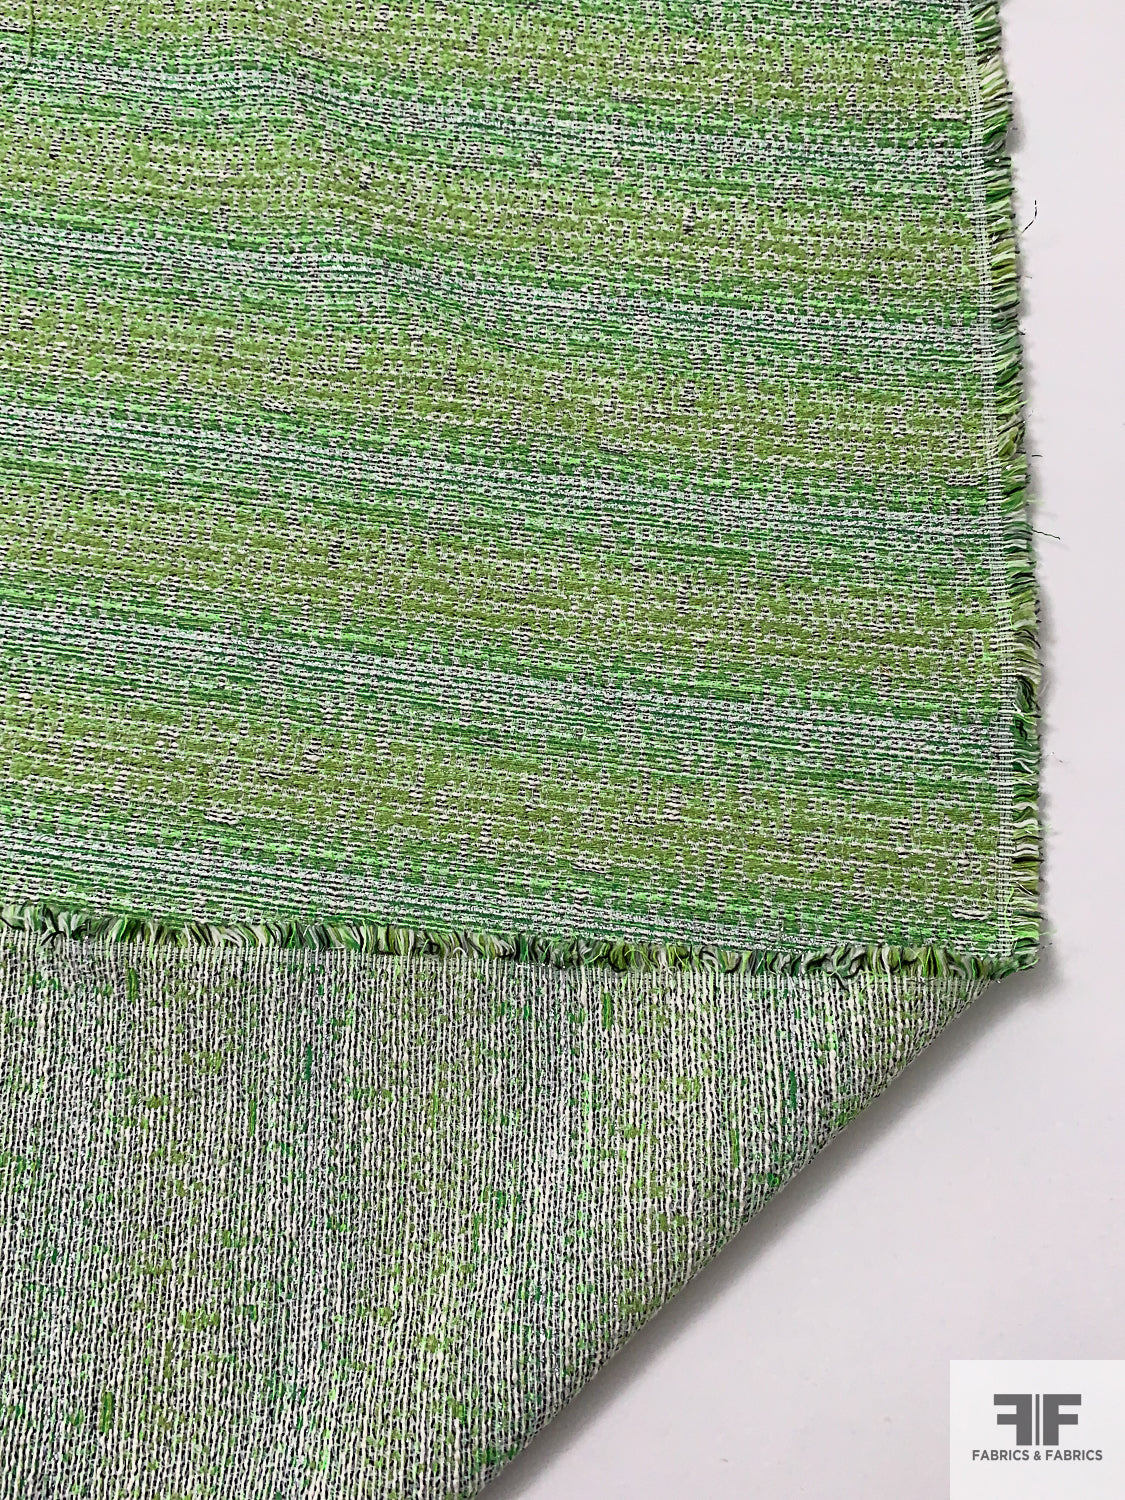 Italian Classic Tweed with Silver Shimmer Threads - Shades of Green / White / Silver Lurex